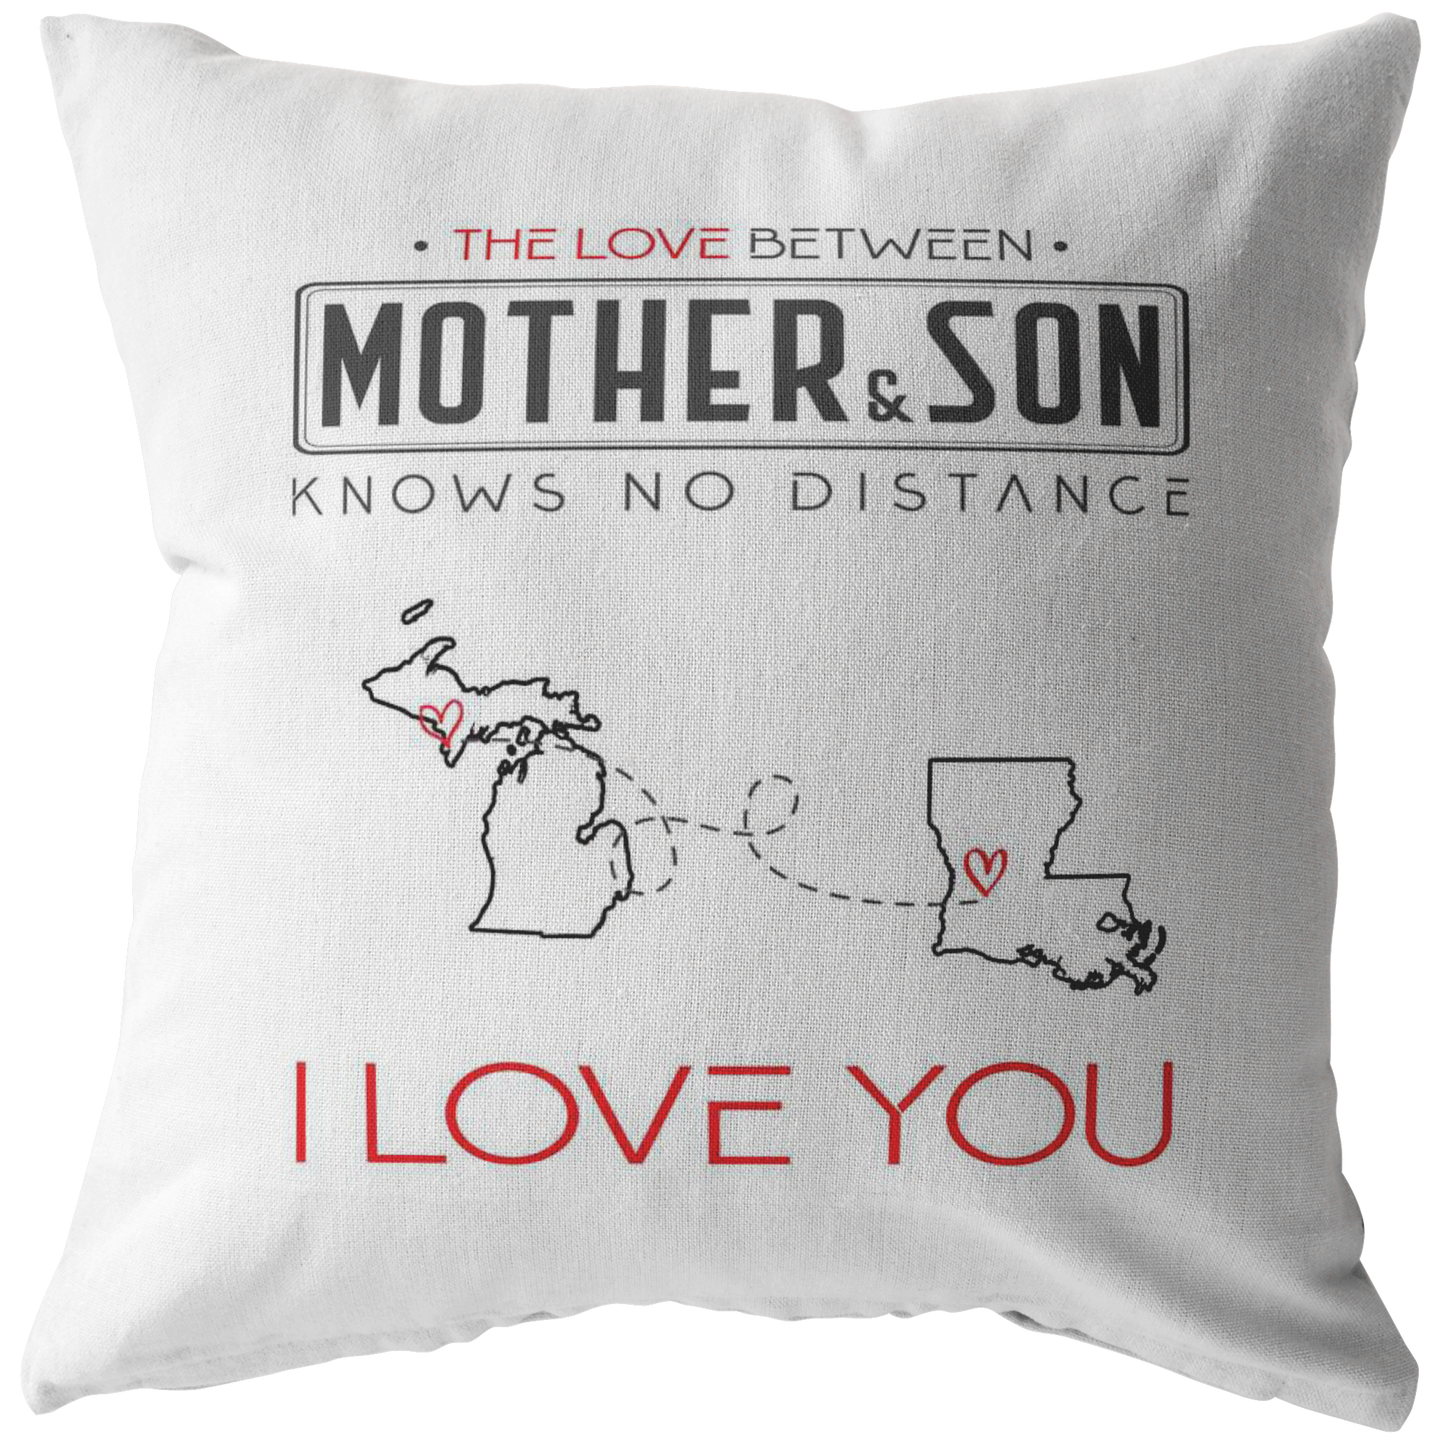 ND-pl20419867-sp-23078 - The Love Between Mother  Son Knows No Distance Michigan Sta